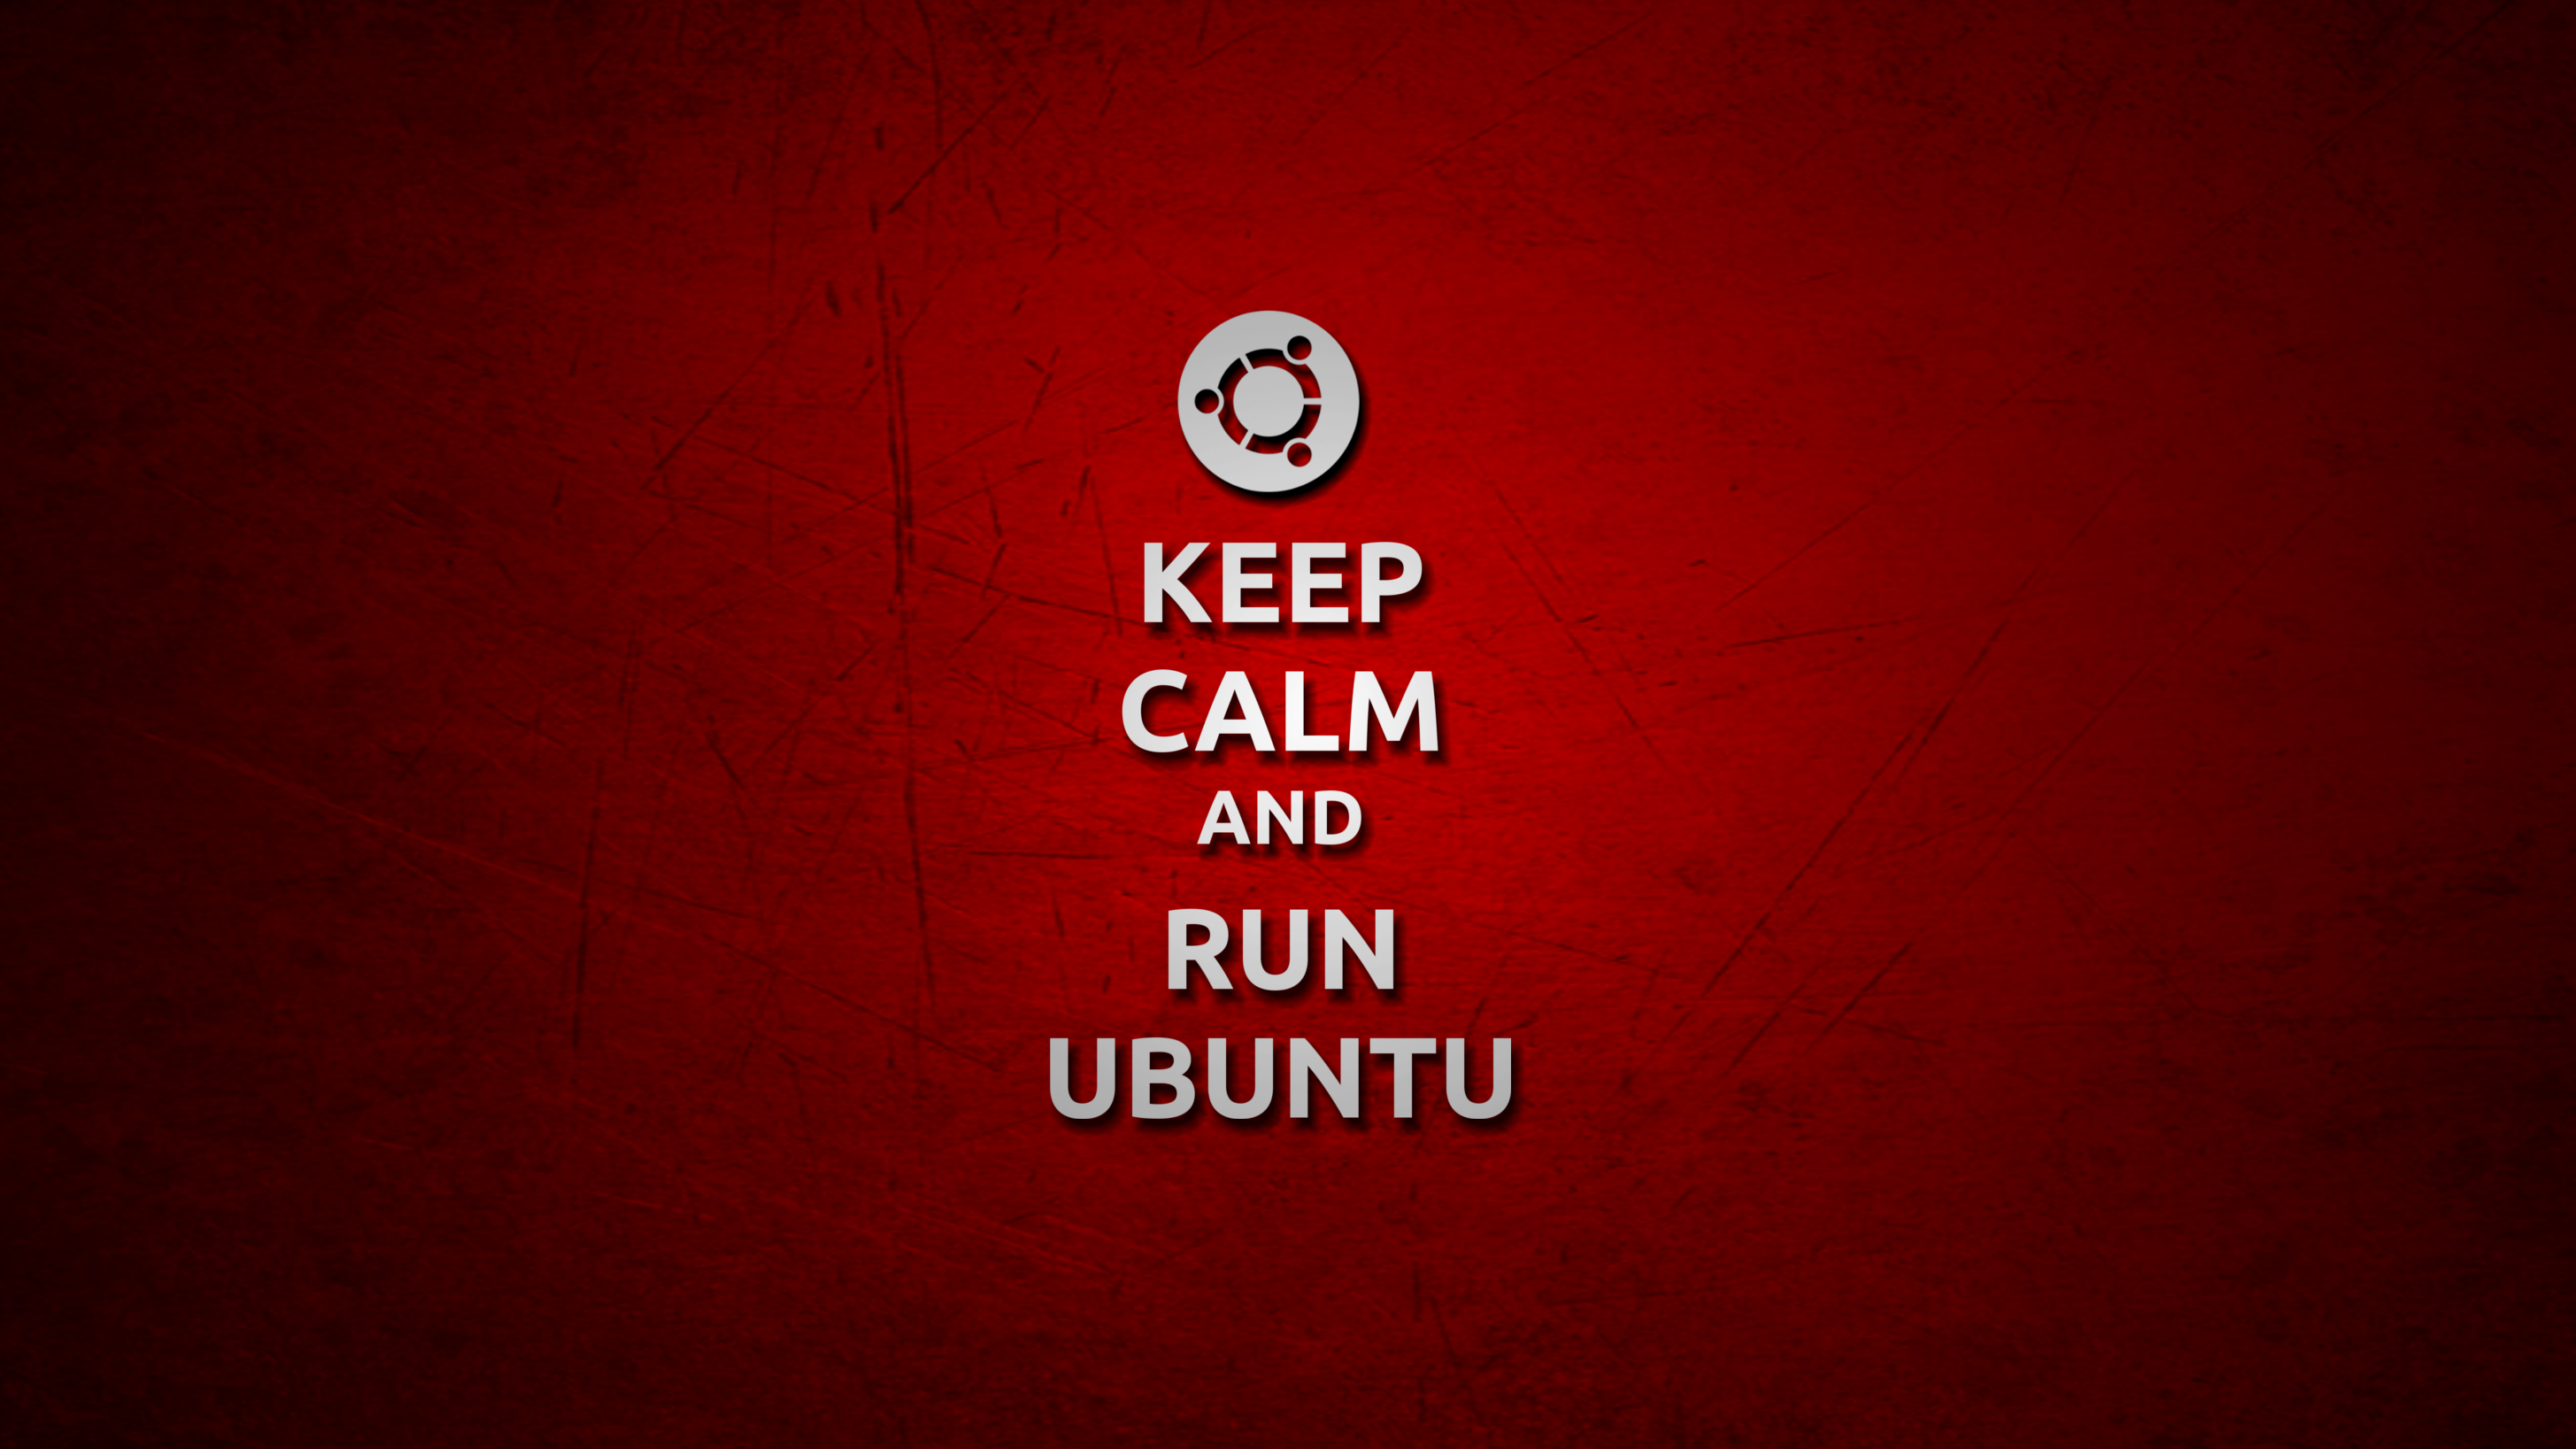 keep calm wallpapers,text,red,font,logo,brand